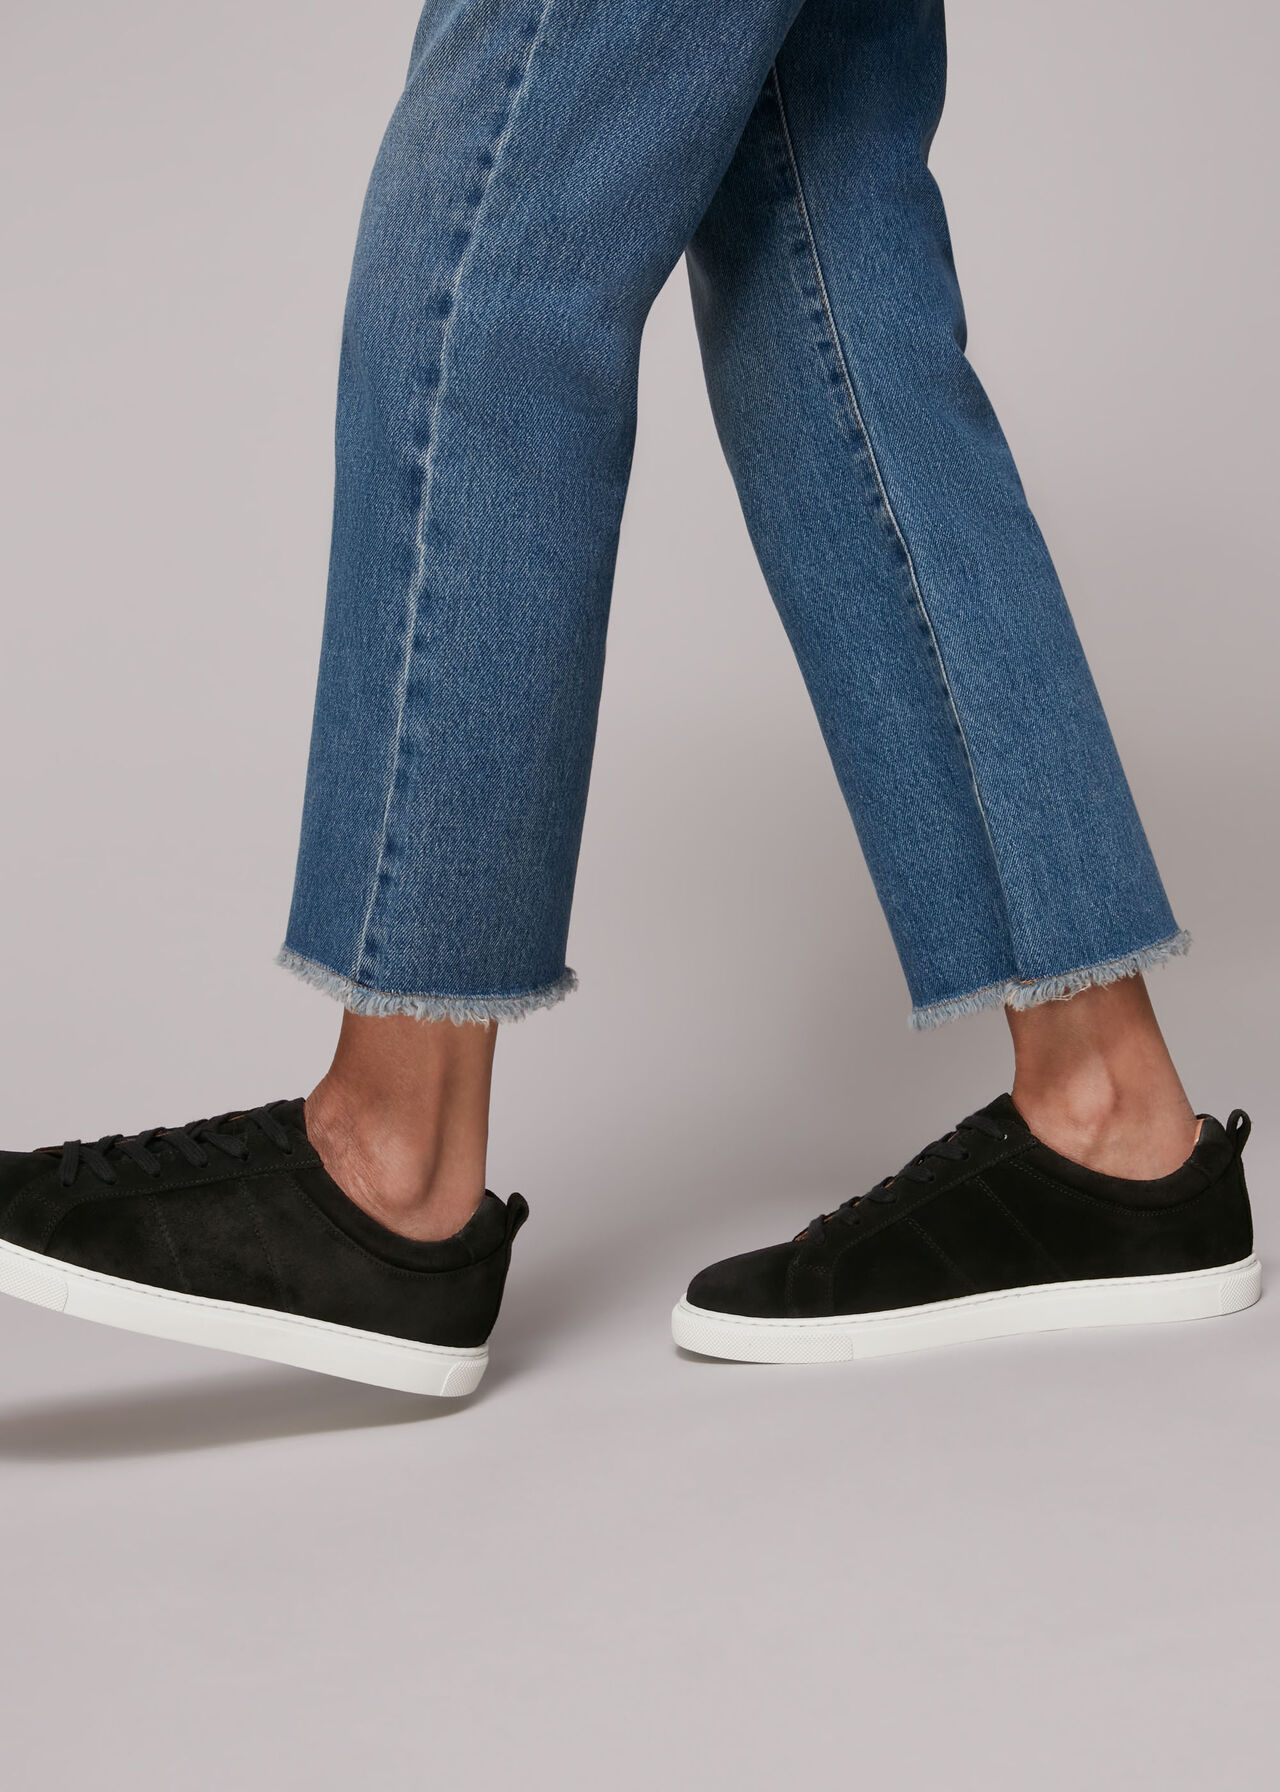 Black Koki Suede Lace Up Trainer | WHISTLES